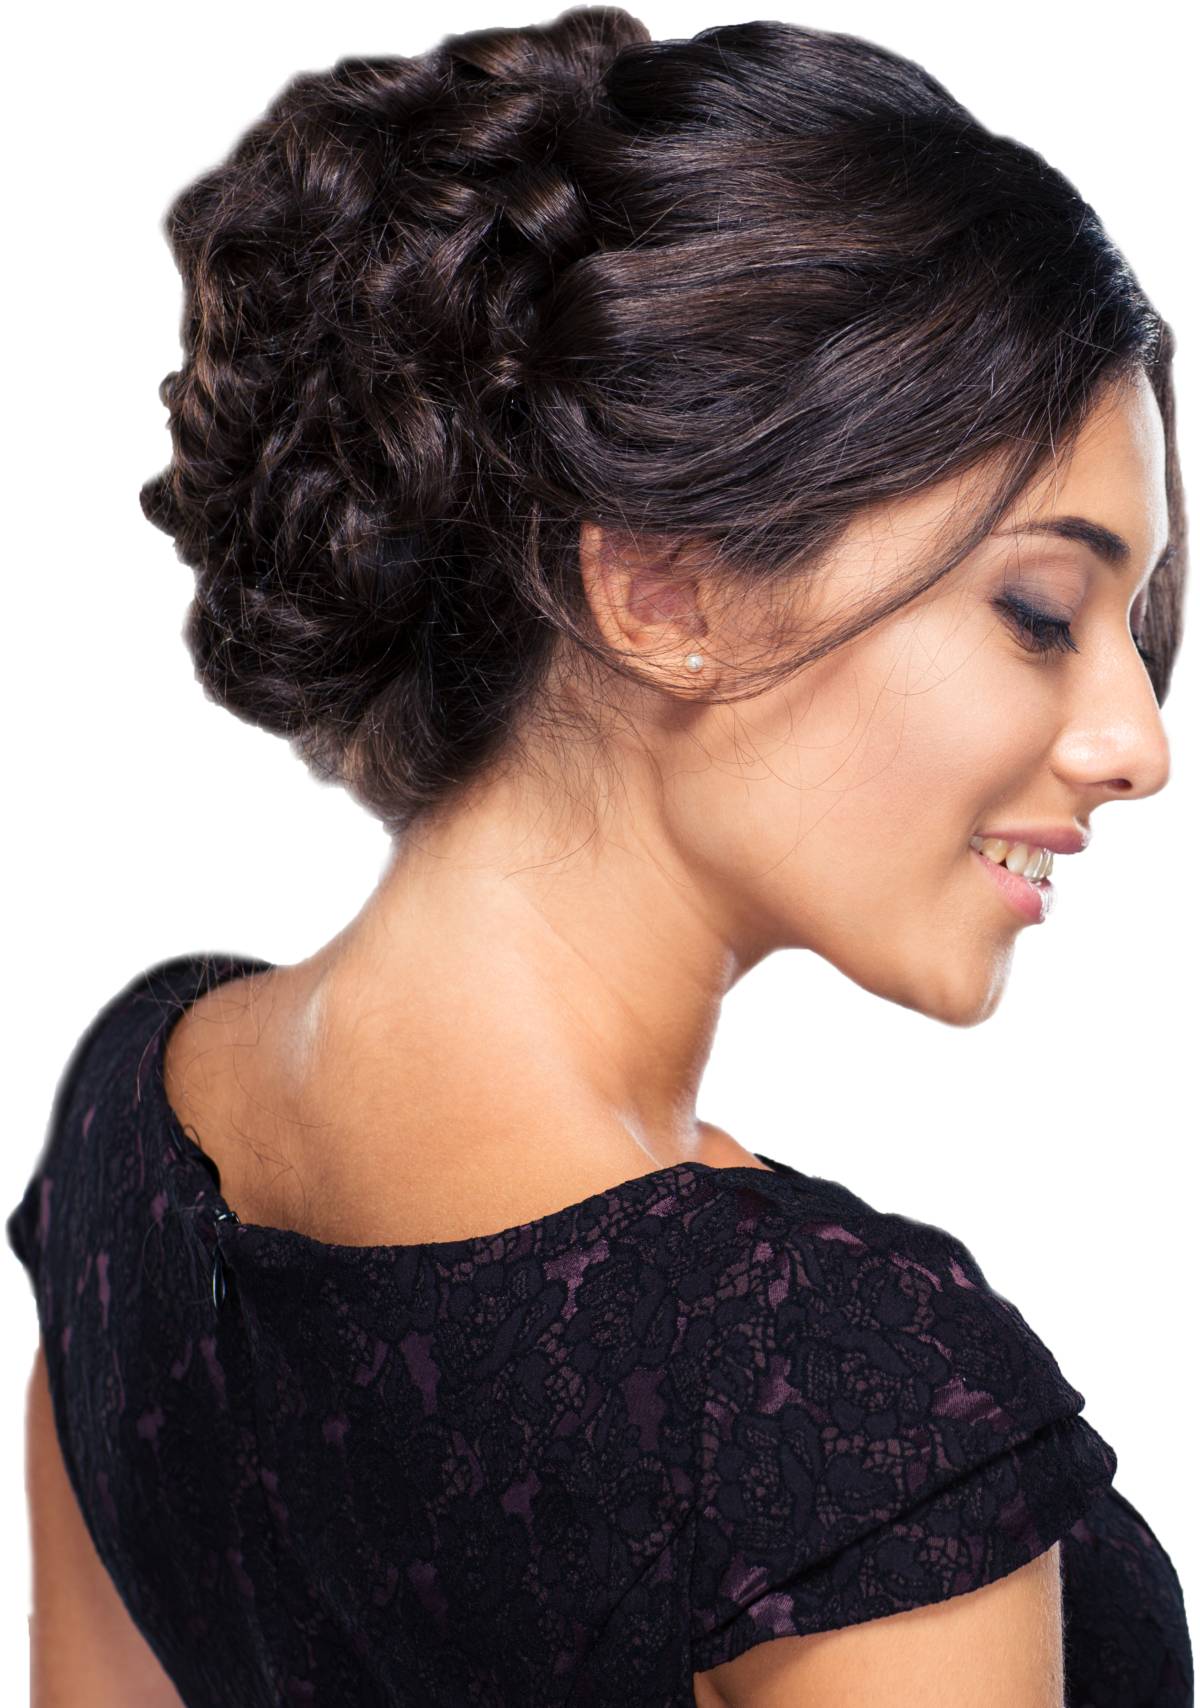 Start your affordable franchise today with Lemon Tree Hair Salons.